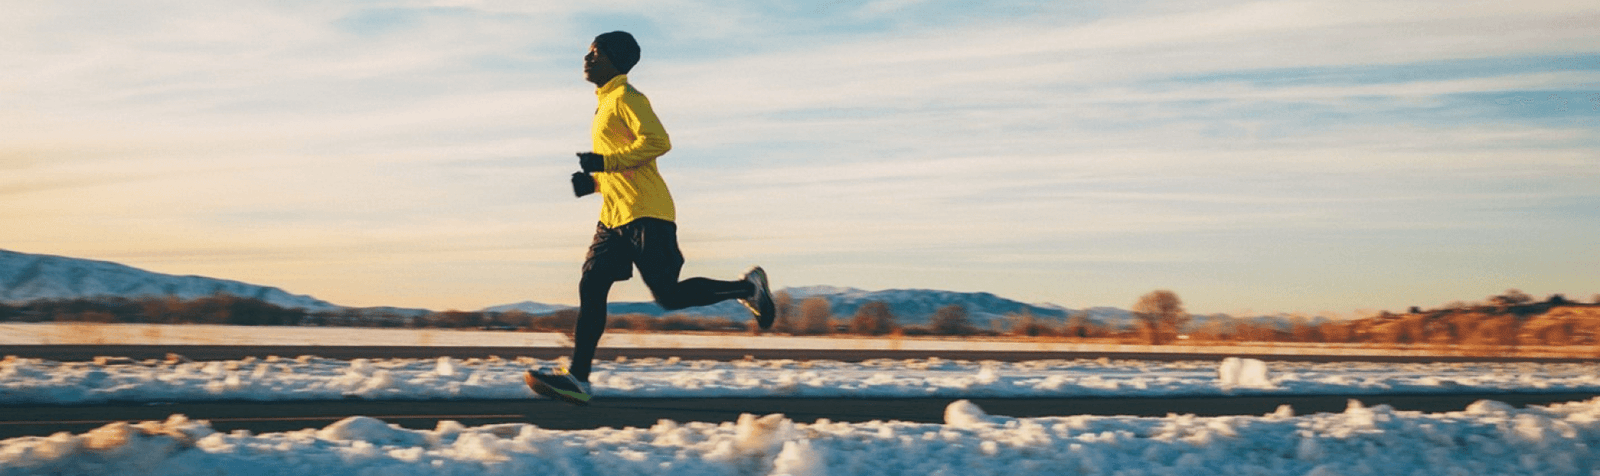 Here’s 15 top tips for working out in the cold. Check out No. 4